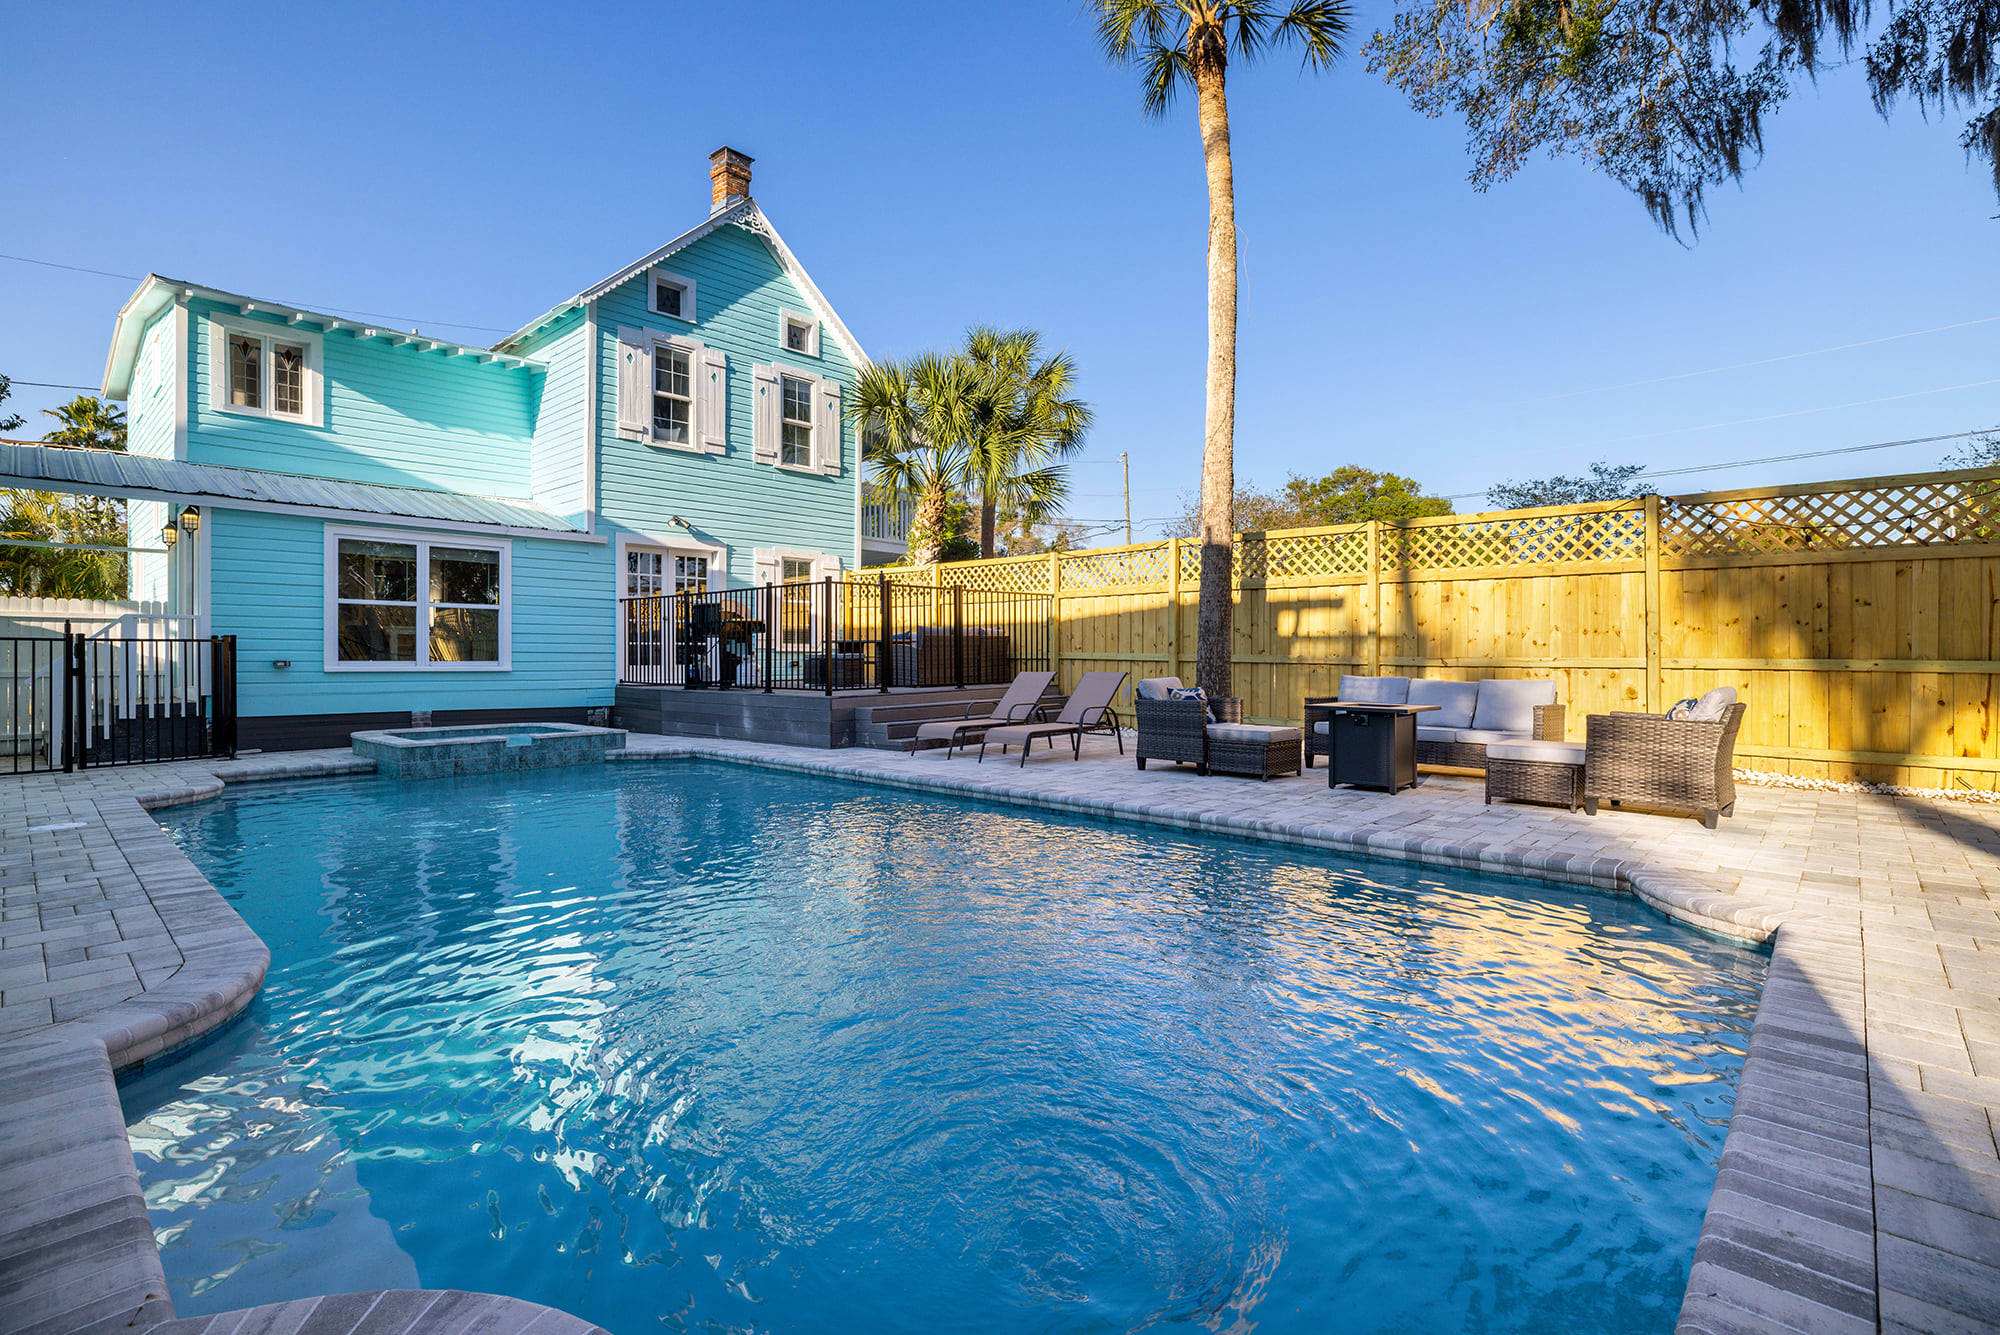 Large and completely updated pool, deck and hot tub!